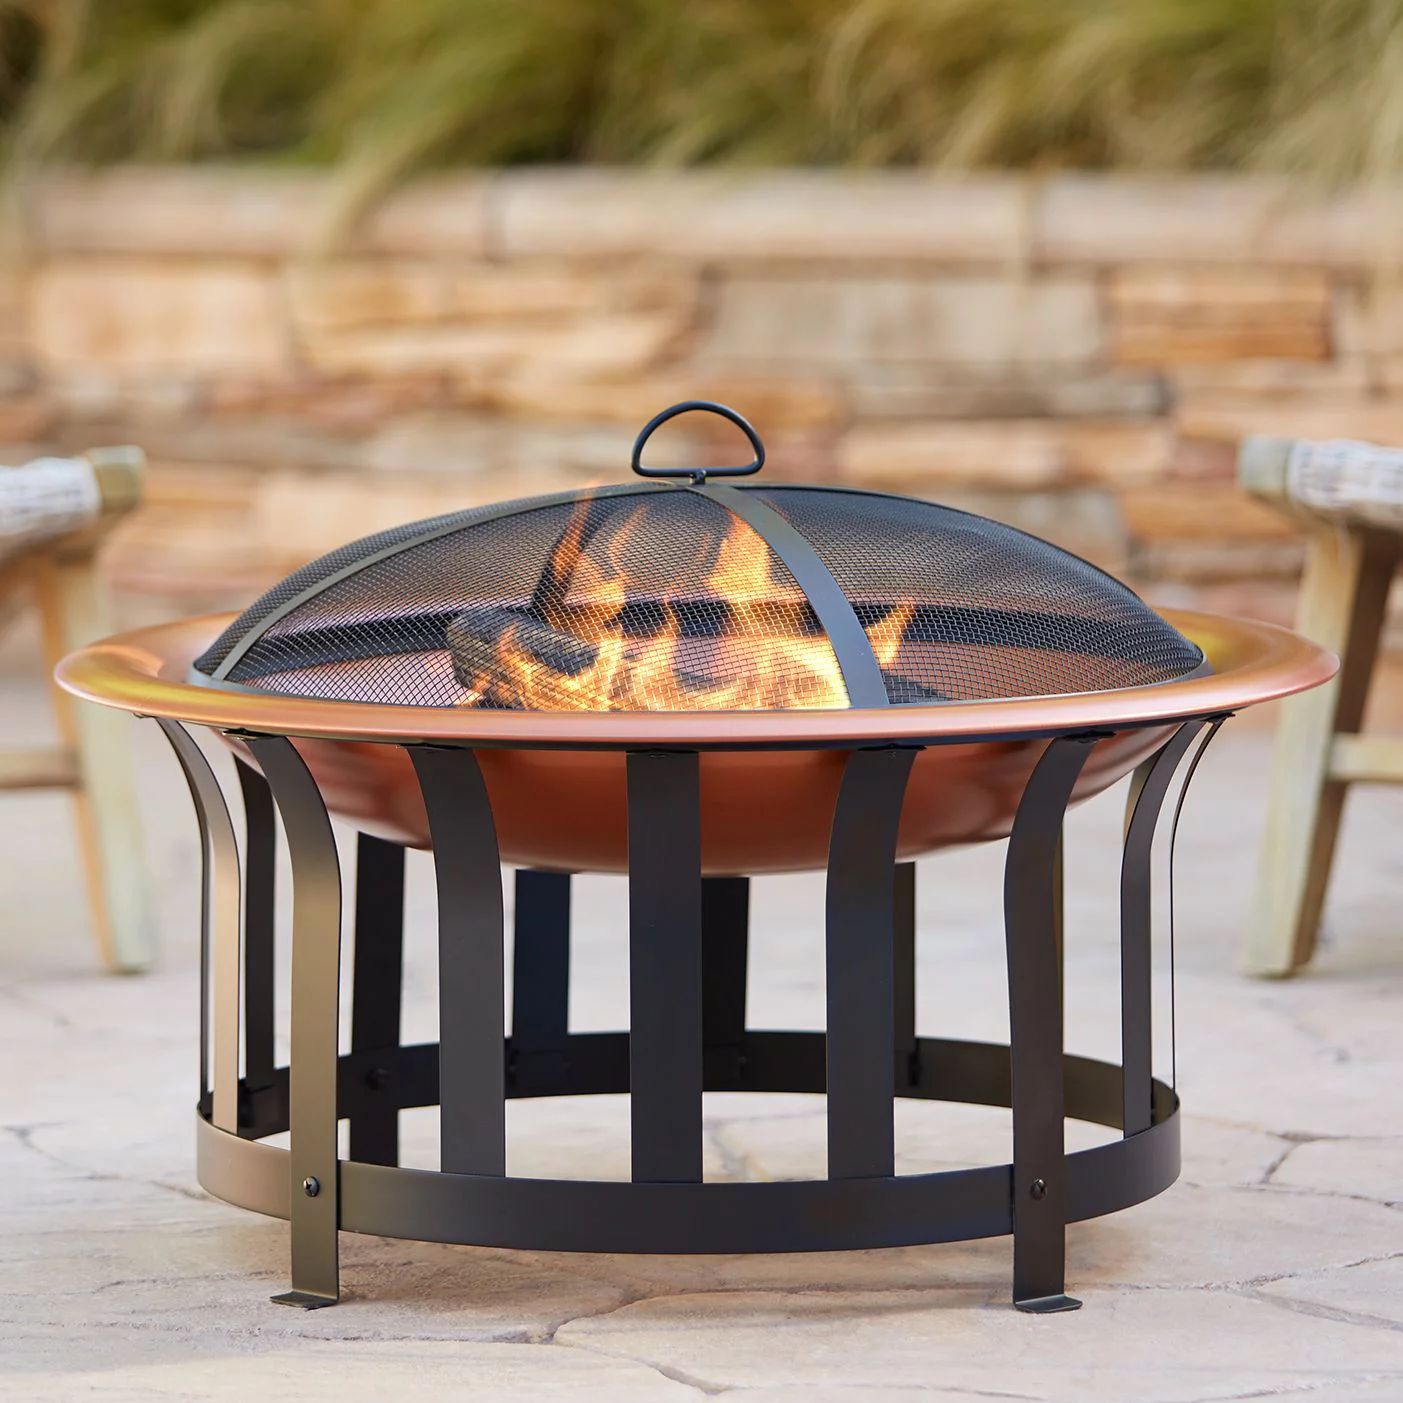 John Timberland Copper and Black Outdoor Fire Pit Round 30" Steel Wood Burning with Spark Screen ... | Walmart (US)